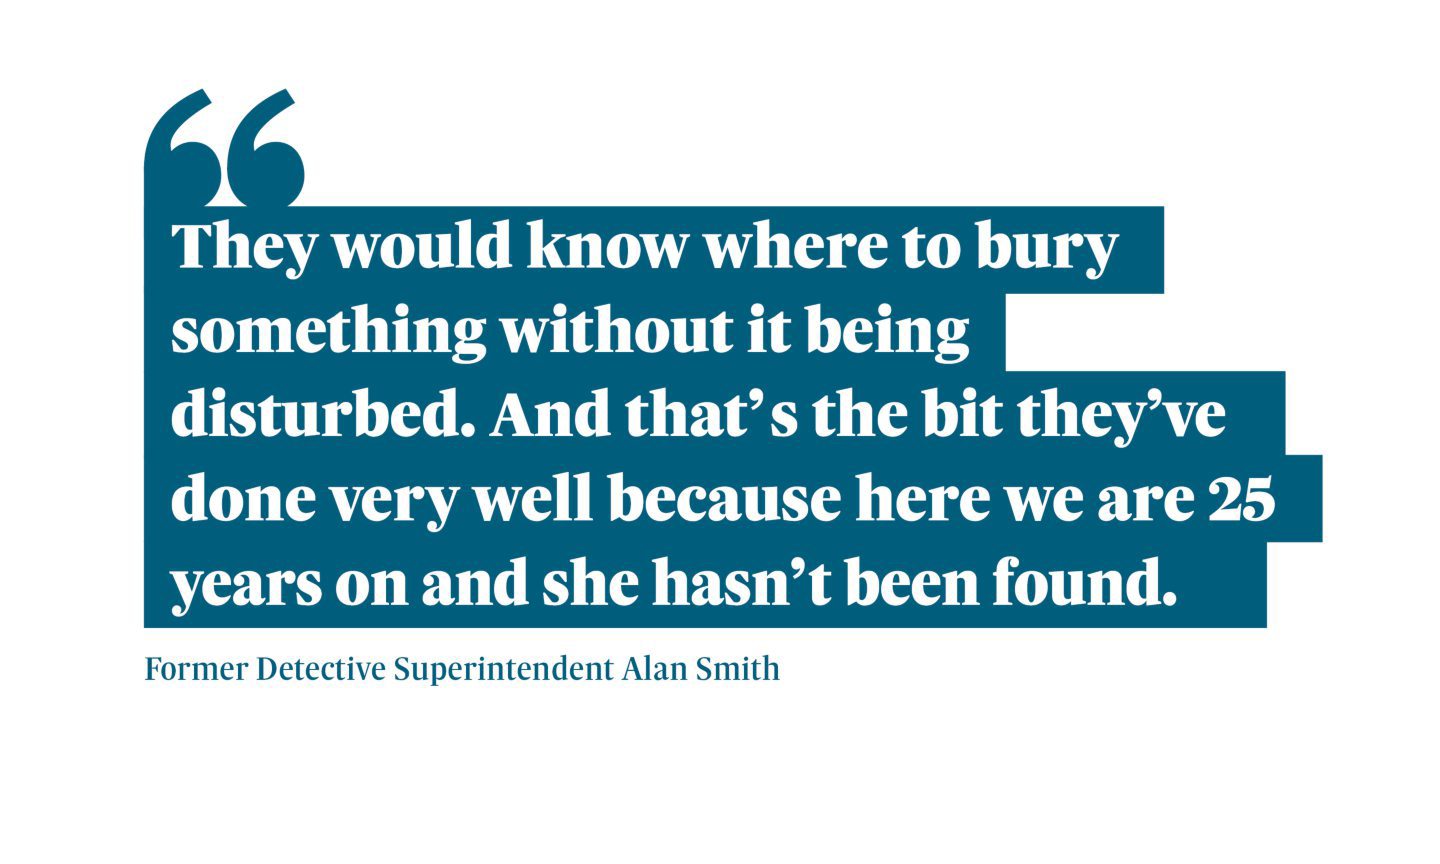 Quotation from former detective superintendent Alan Smith: “They would know where to bury something without it being disturbed. And that’s the bit they’ve done very well because here we are 25 years on and she hasn’t been found.”